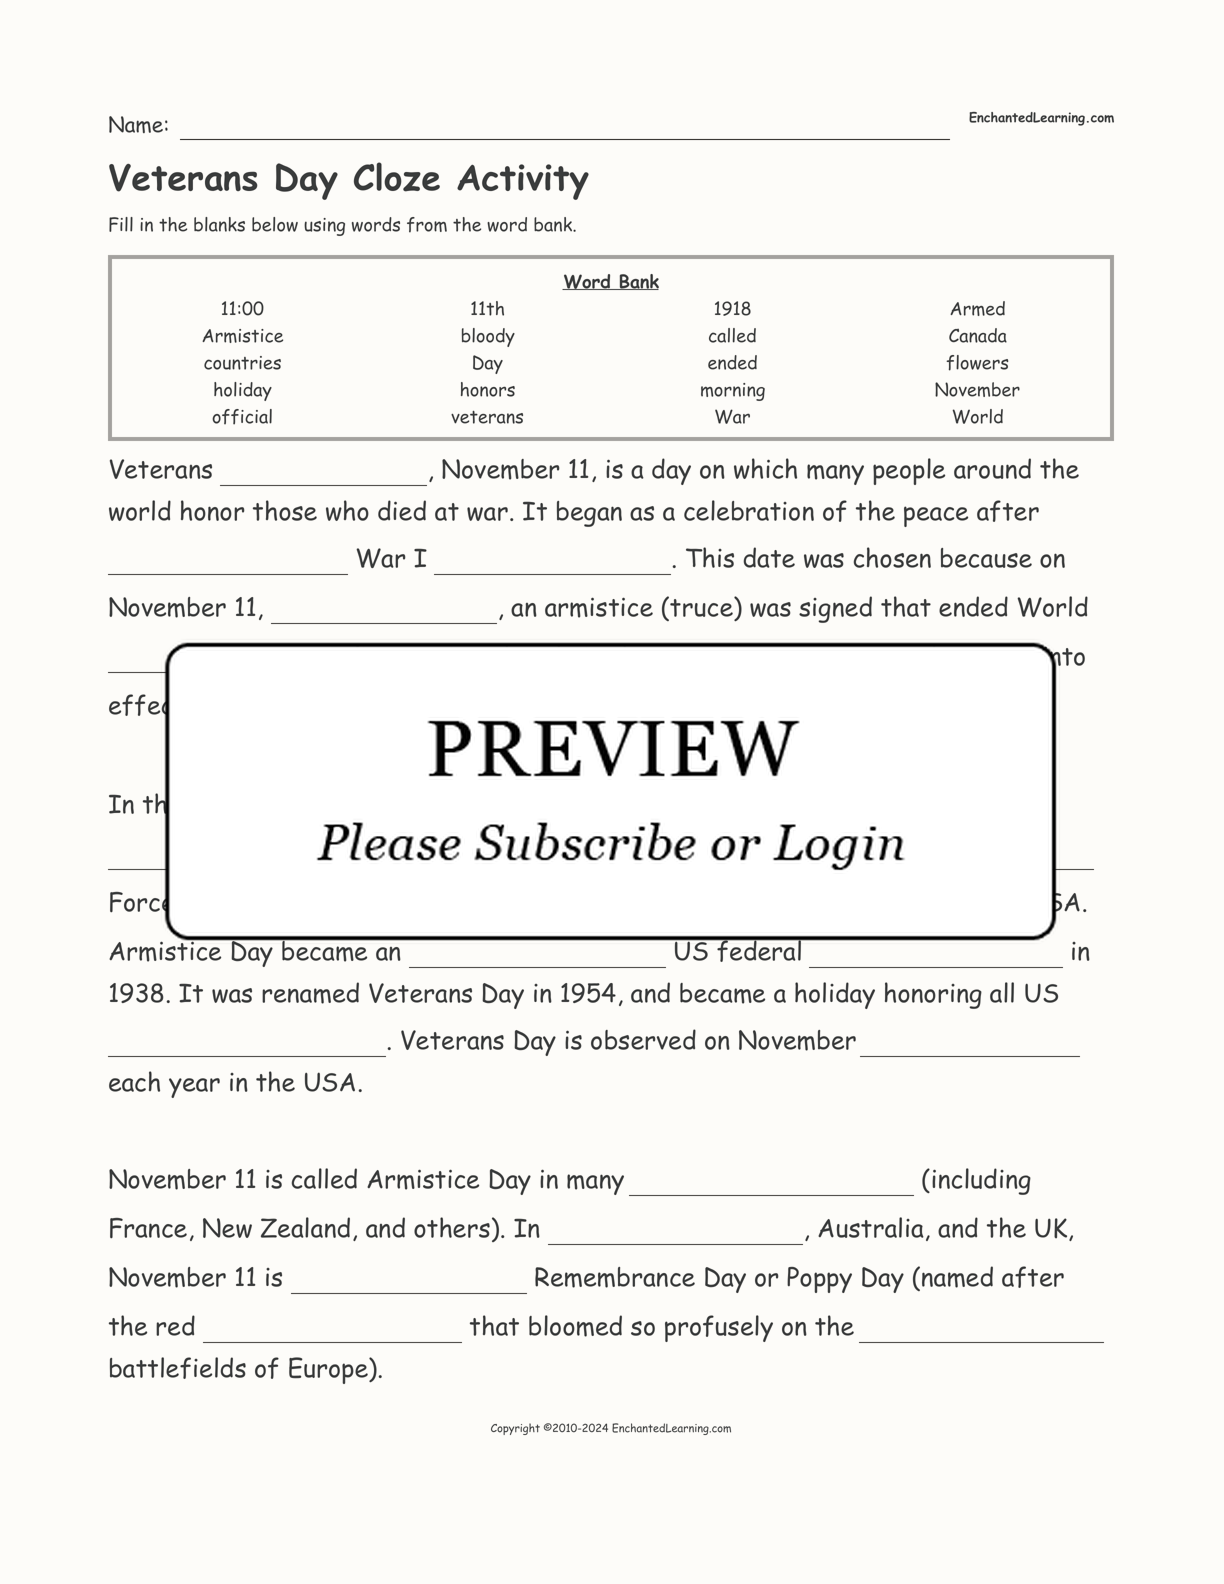 Veterans Day Cloze Activity interactive worksheet page 1